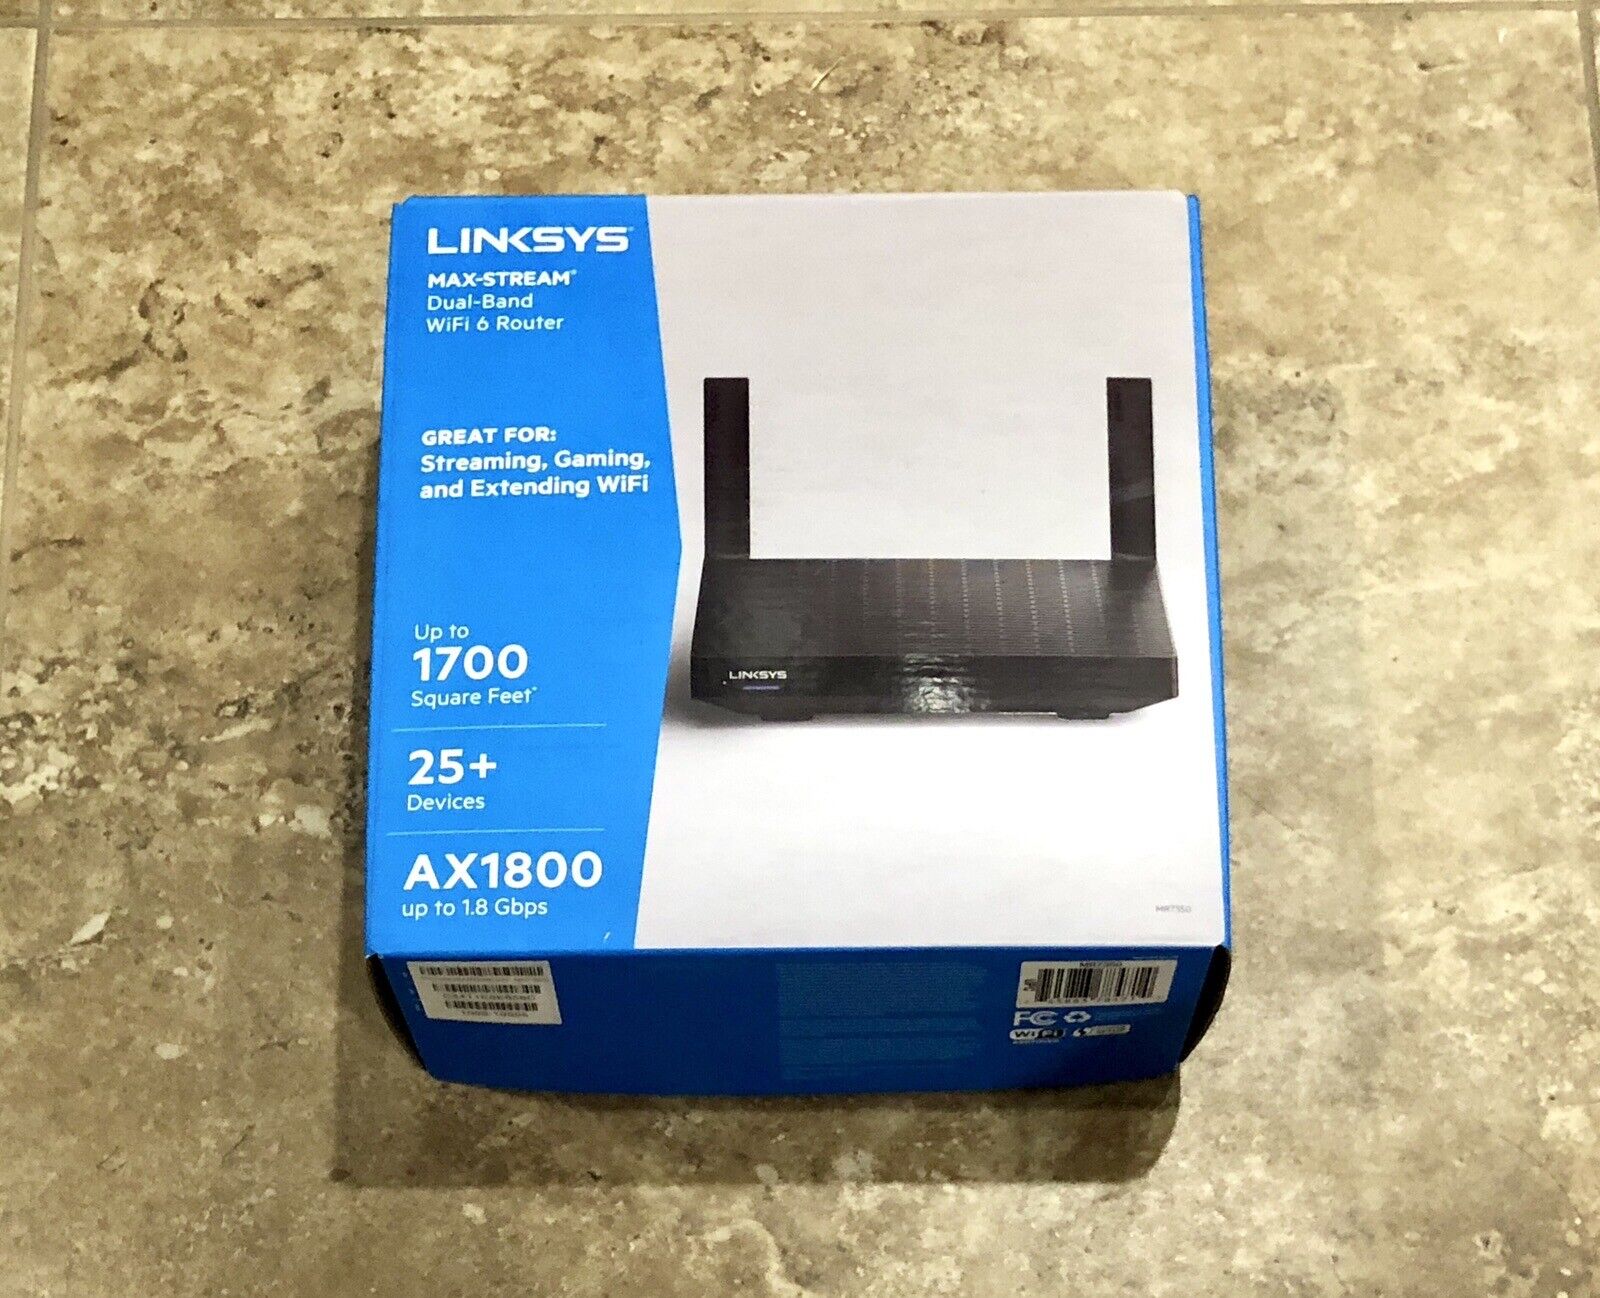 Linksys Max-Stream Dual-Band Wifi 6 Router AX1800